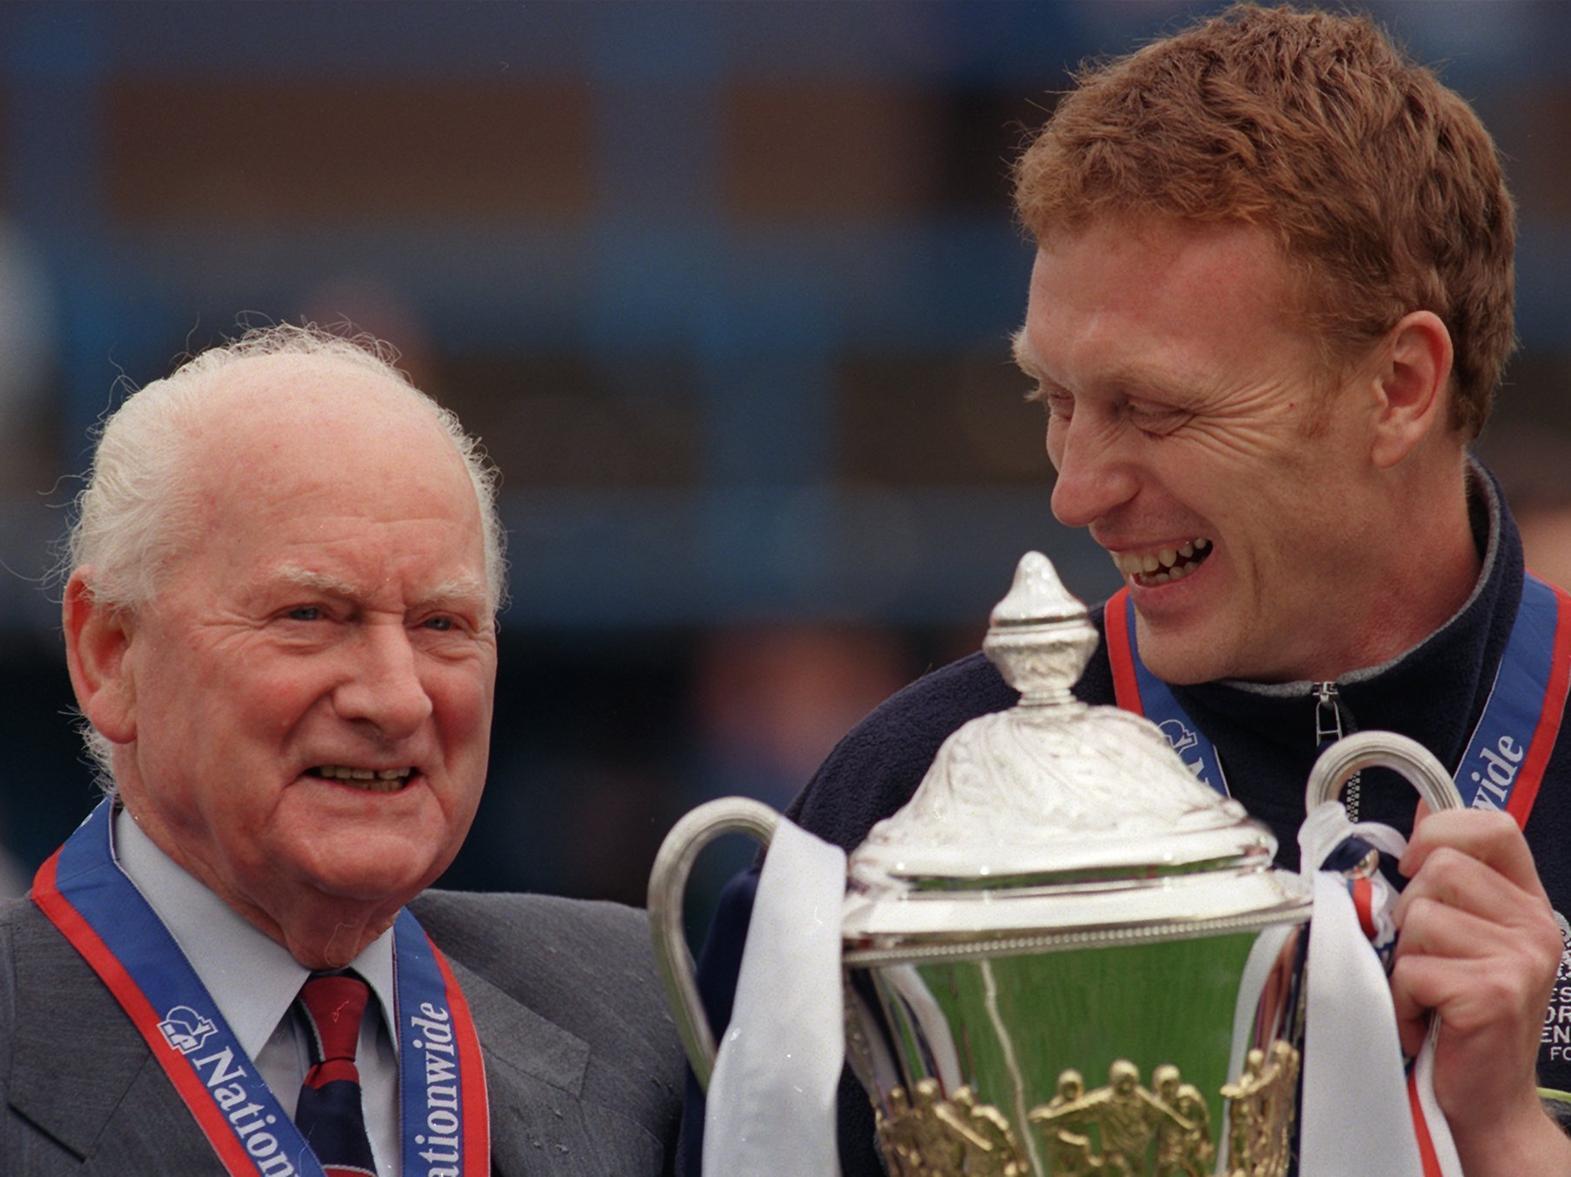 Sir Tom Finney with David Moyes after Preston won the Second Division title in 2000